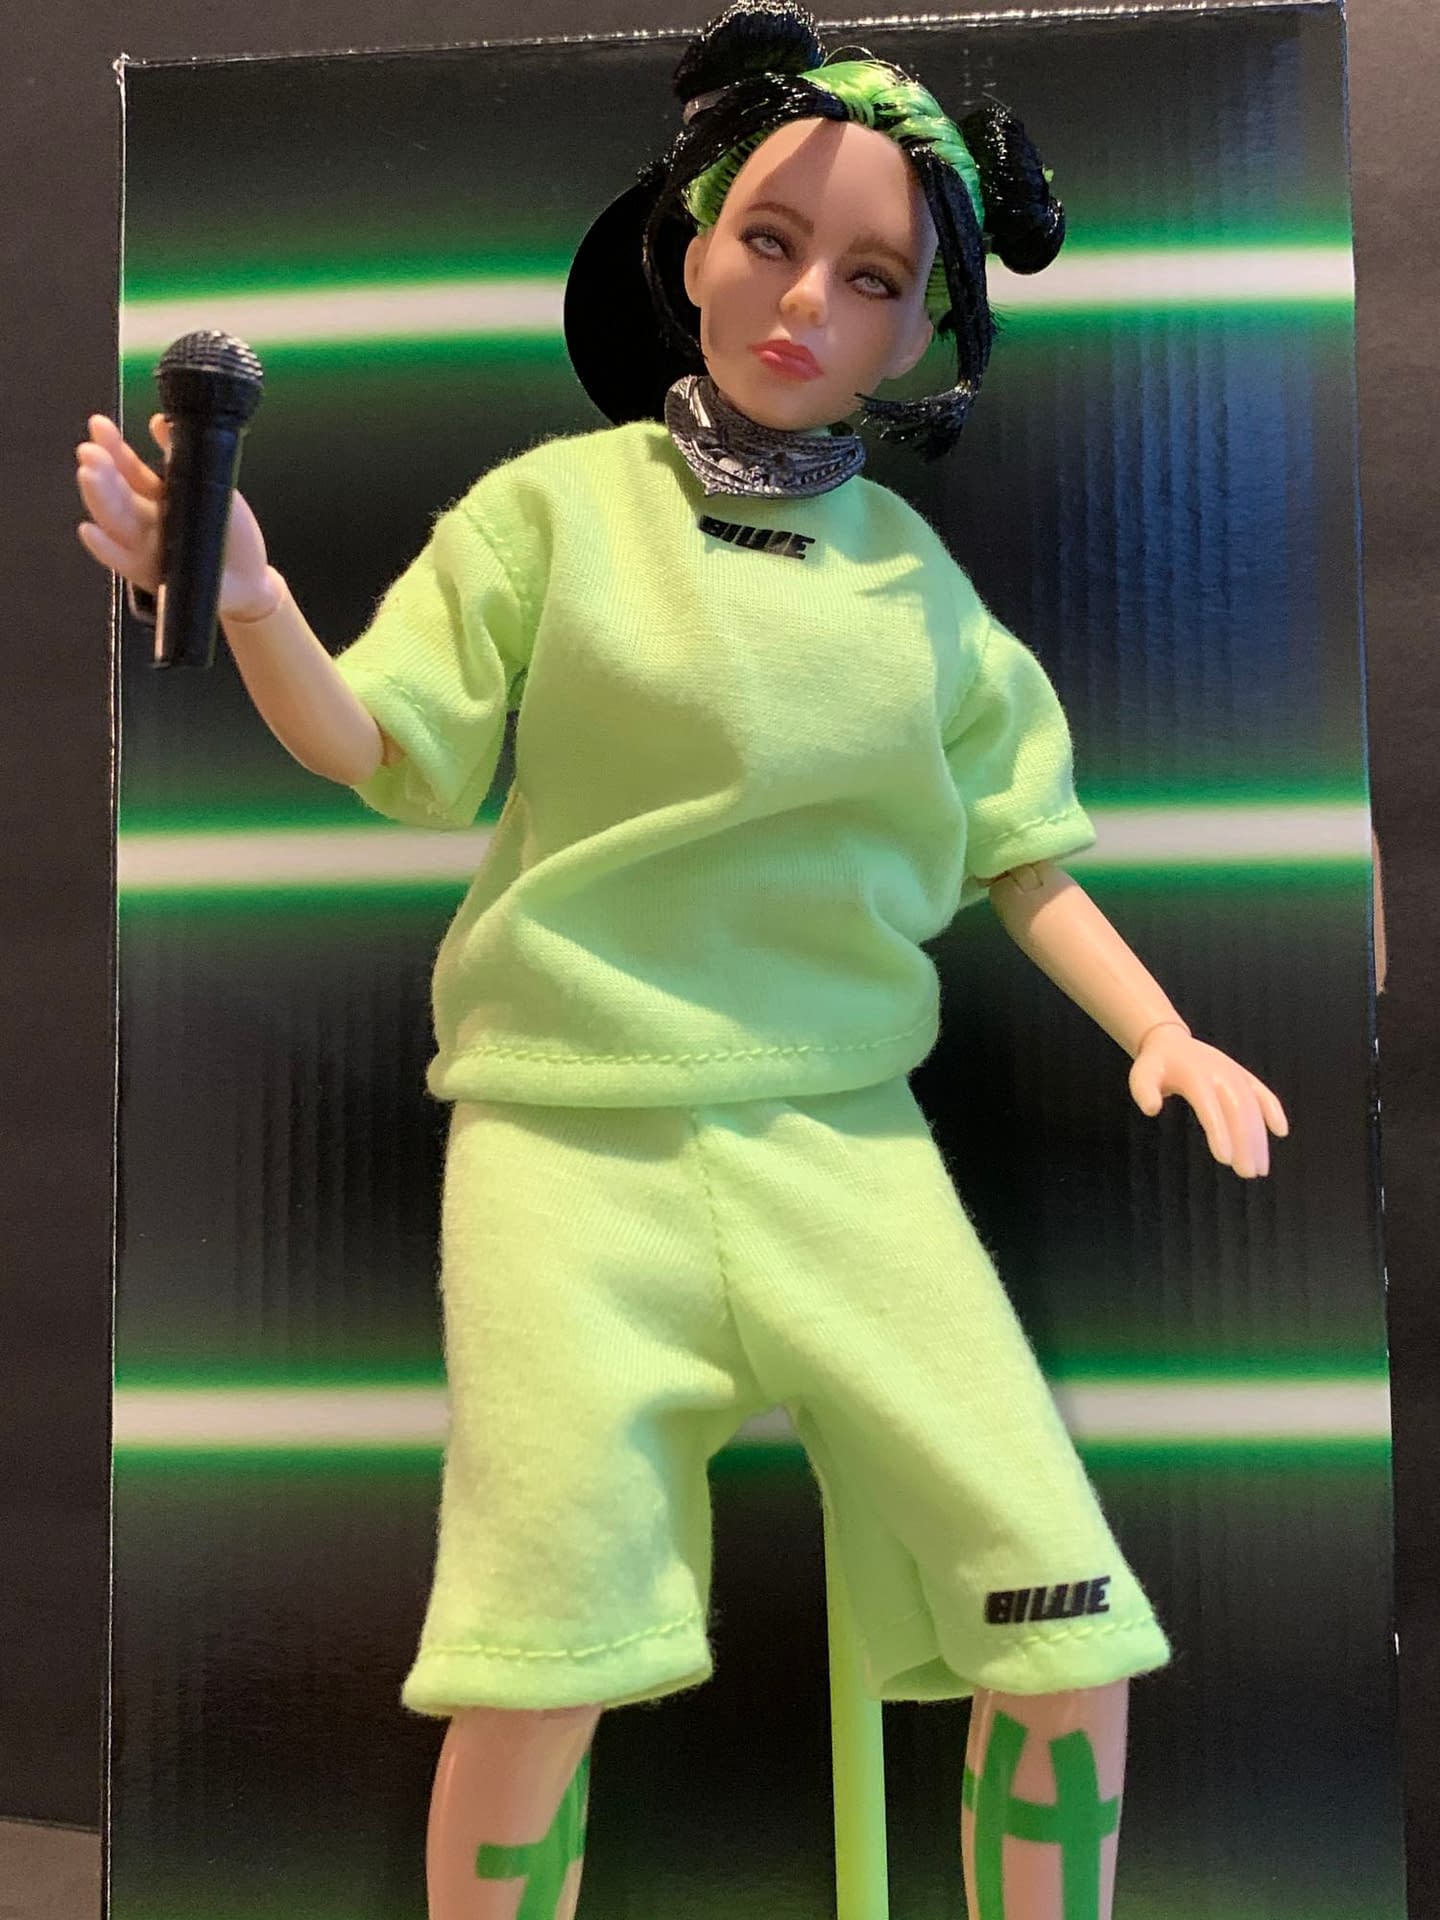 New Billie Eilsh Figures Are Hitting Target Stores From Playmates Now